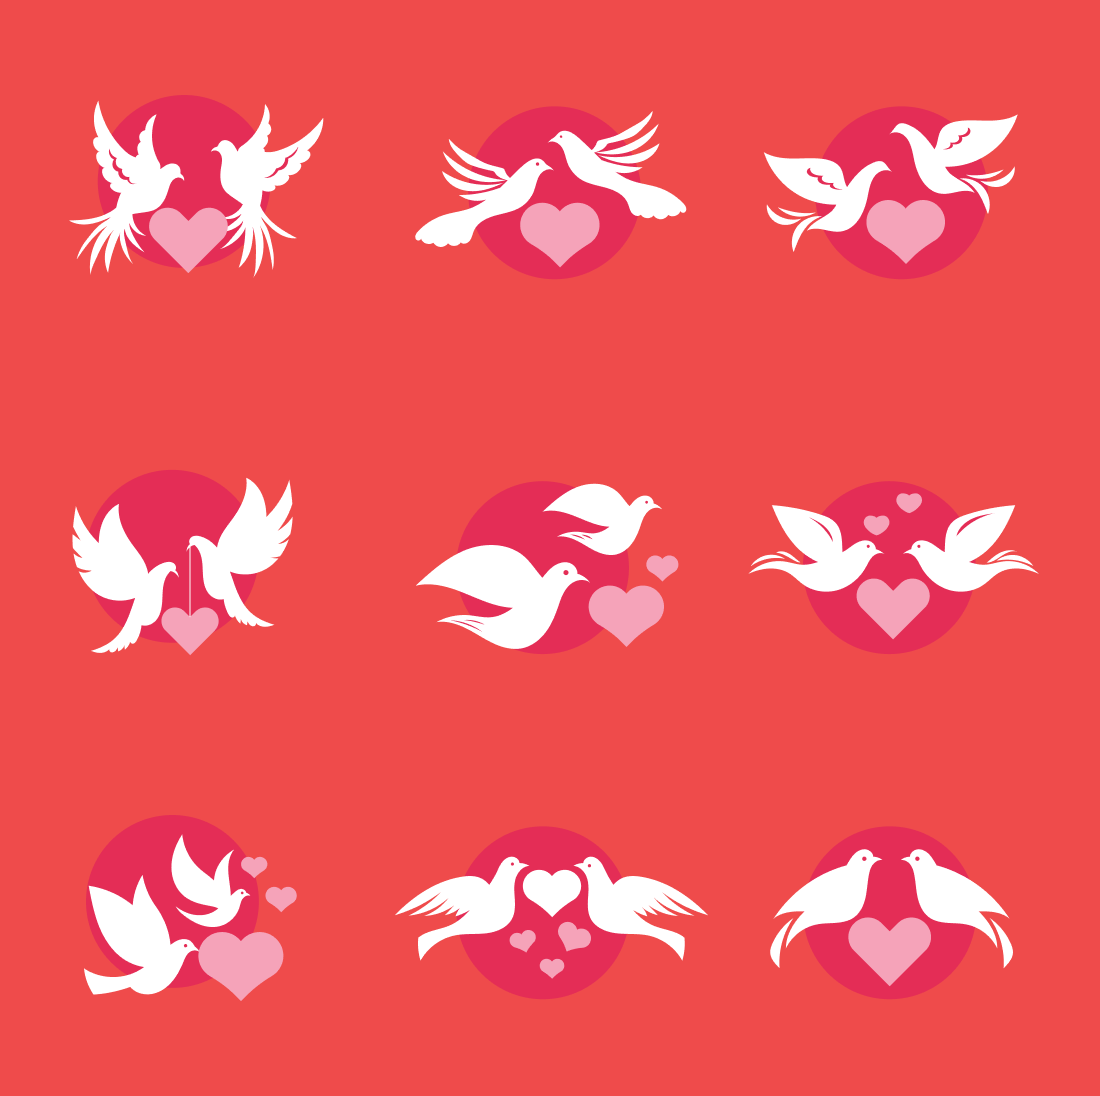 Set of nine doves with hearts on a red background.